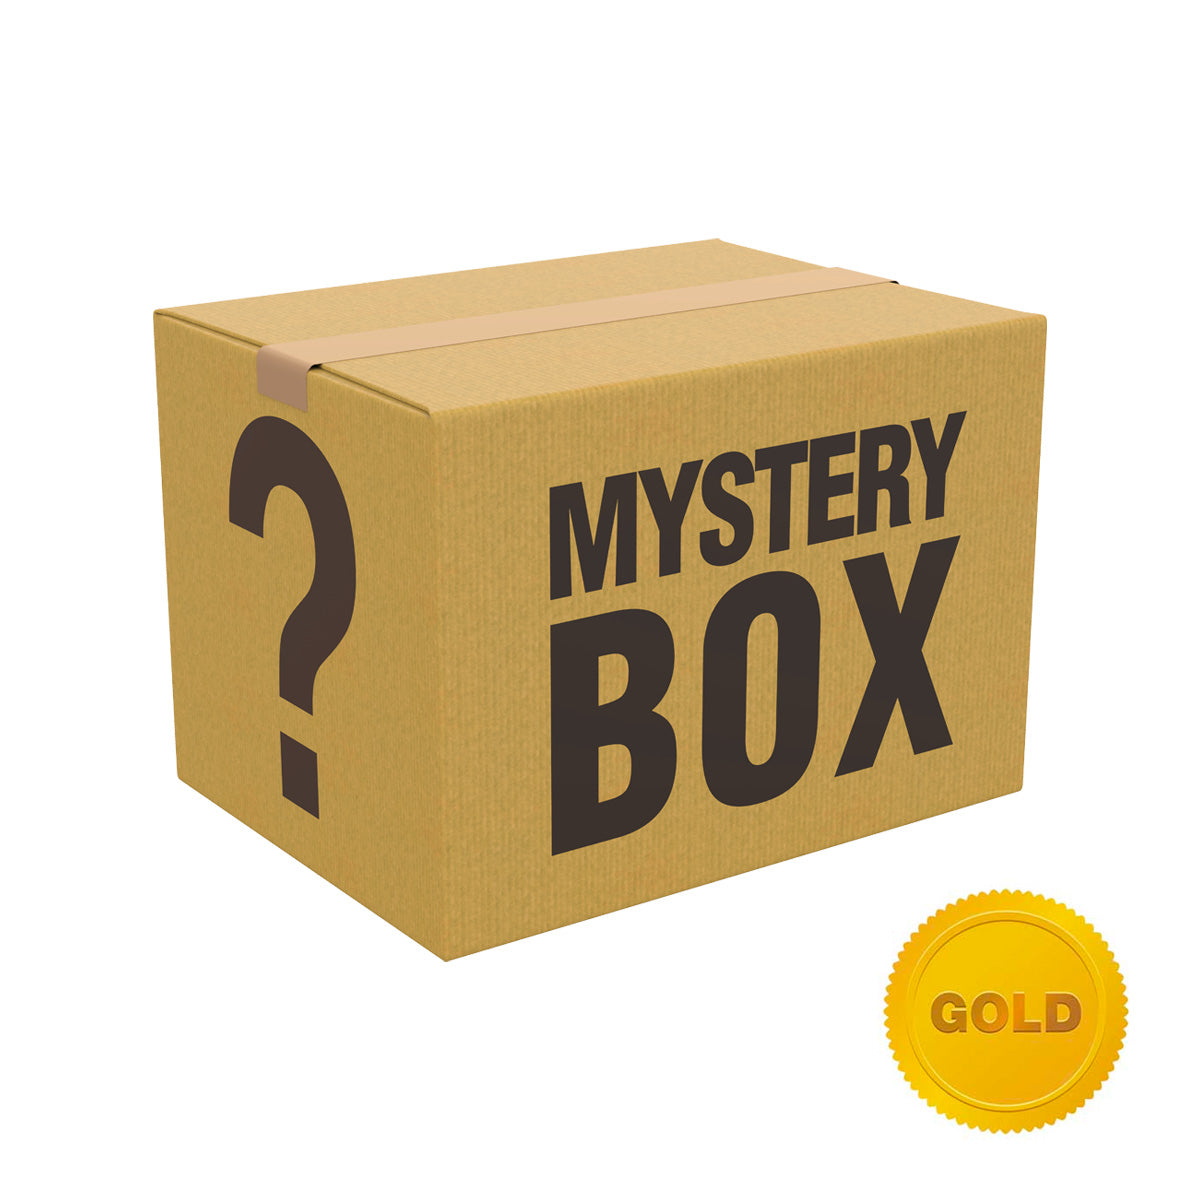 (Gold) Mystery Box with $80 Value